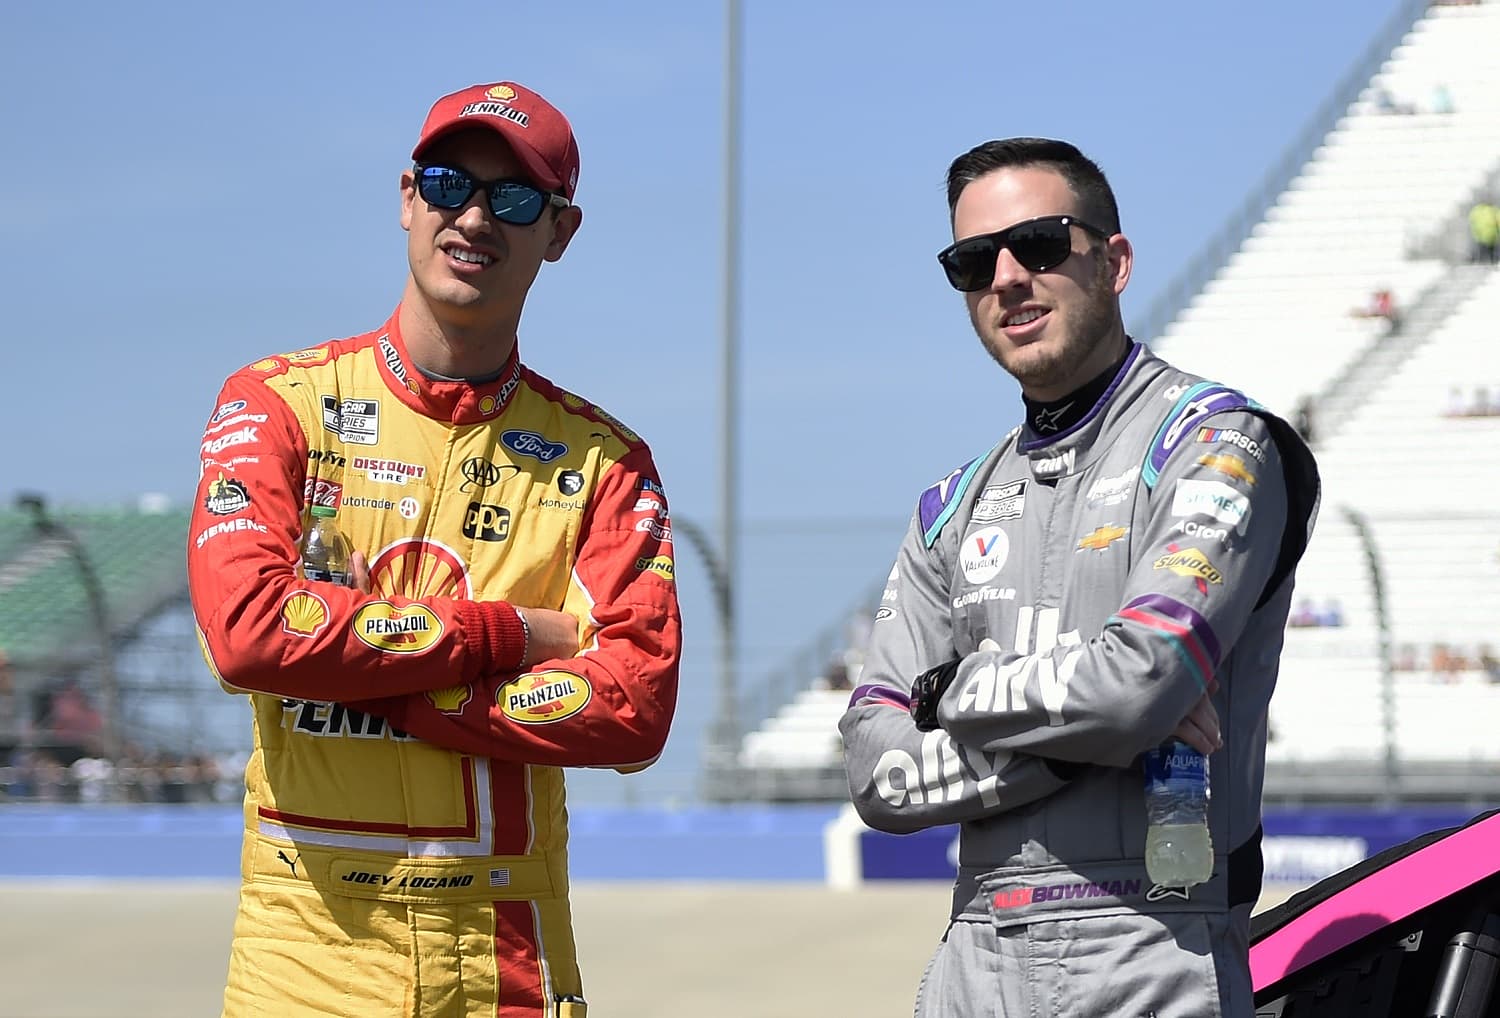 Joey Logano and Alex Bowman talk on the grid during qualifying for the NASCAR Cup Series Ally 400 at Nashville Superspeedway on June 20, 2021. | Logan Riely/Getty Images